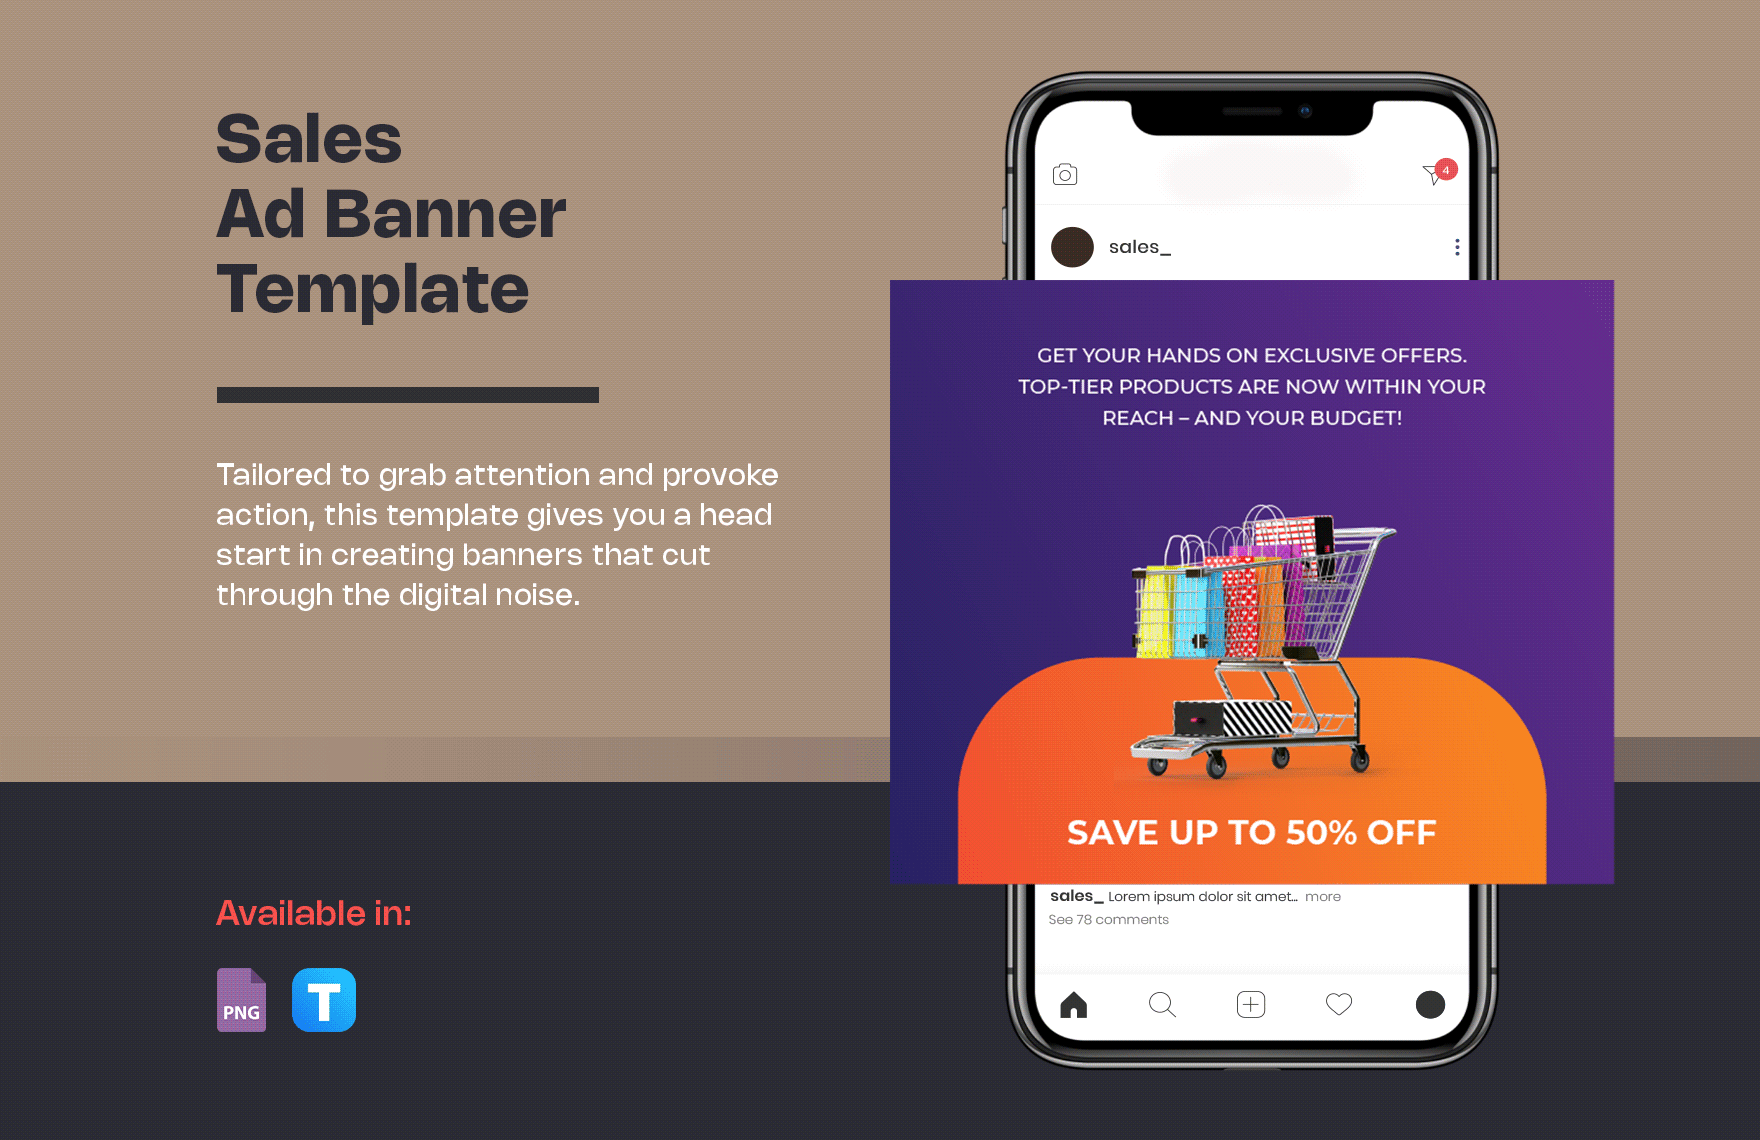 Sales Ad Banner Template